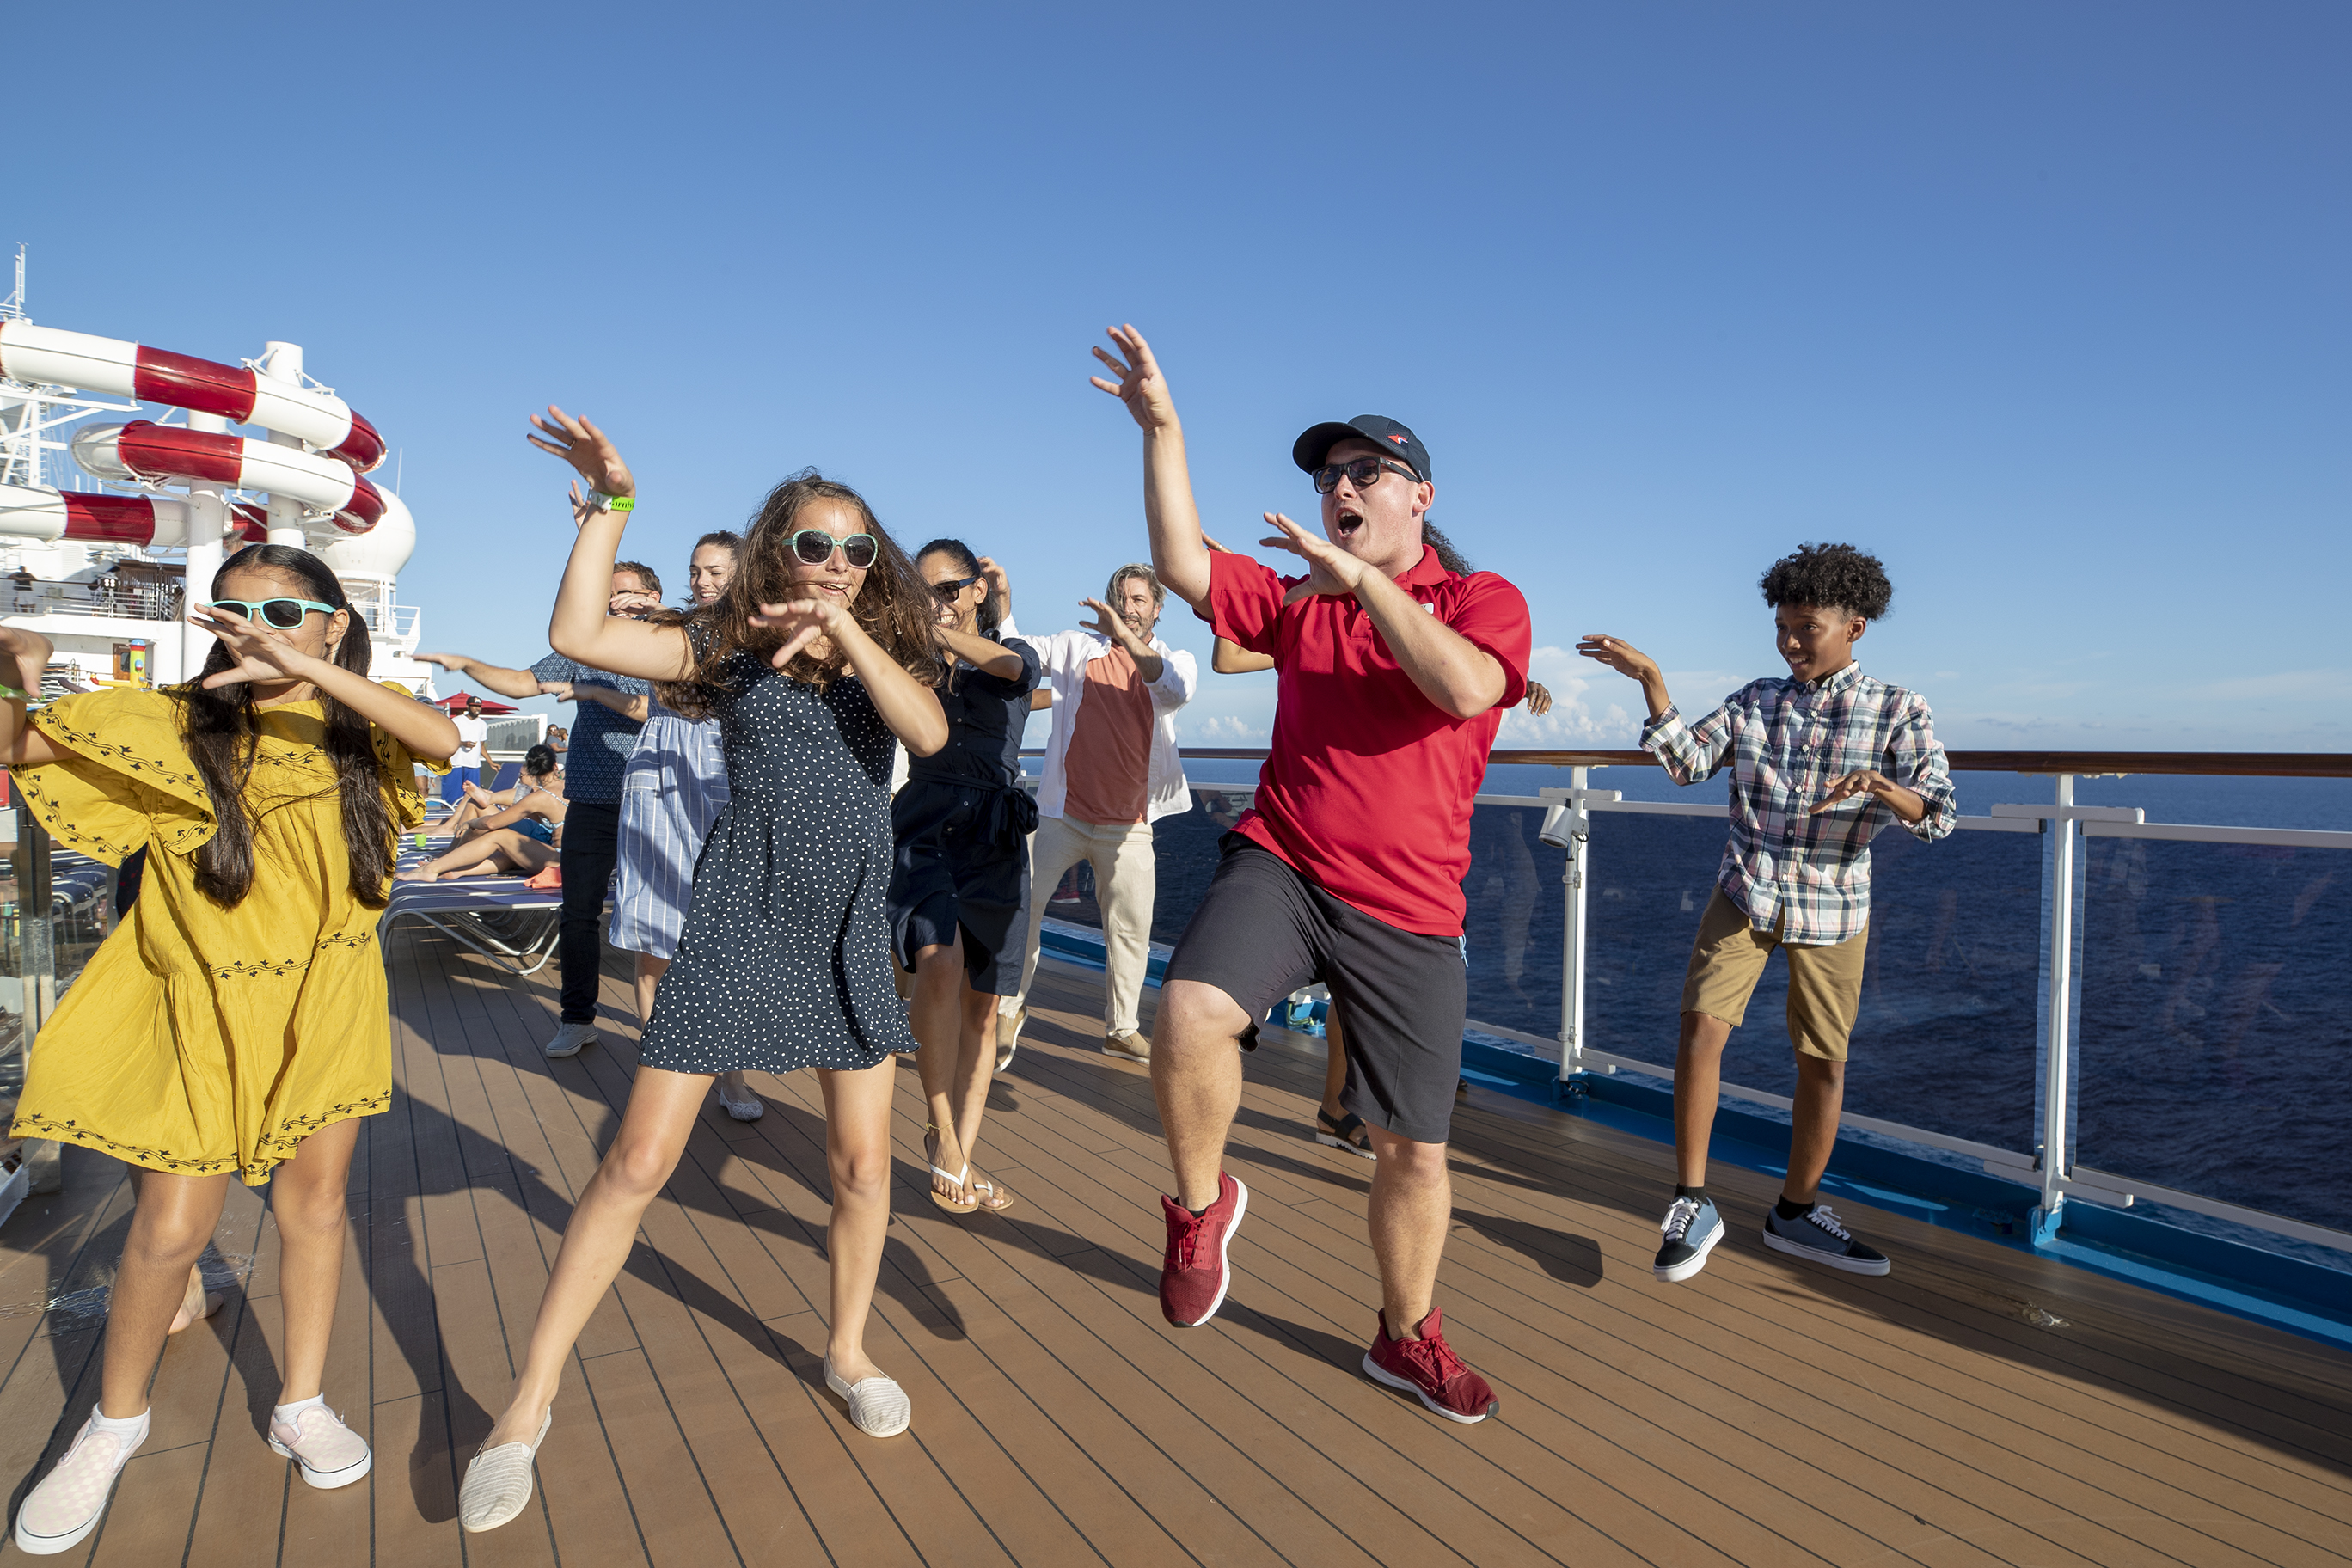 youth staff jobs on cruise ships